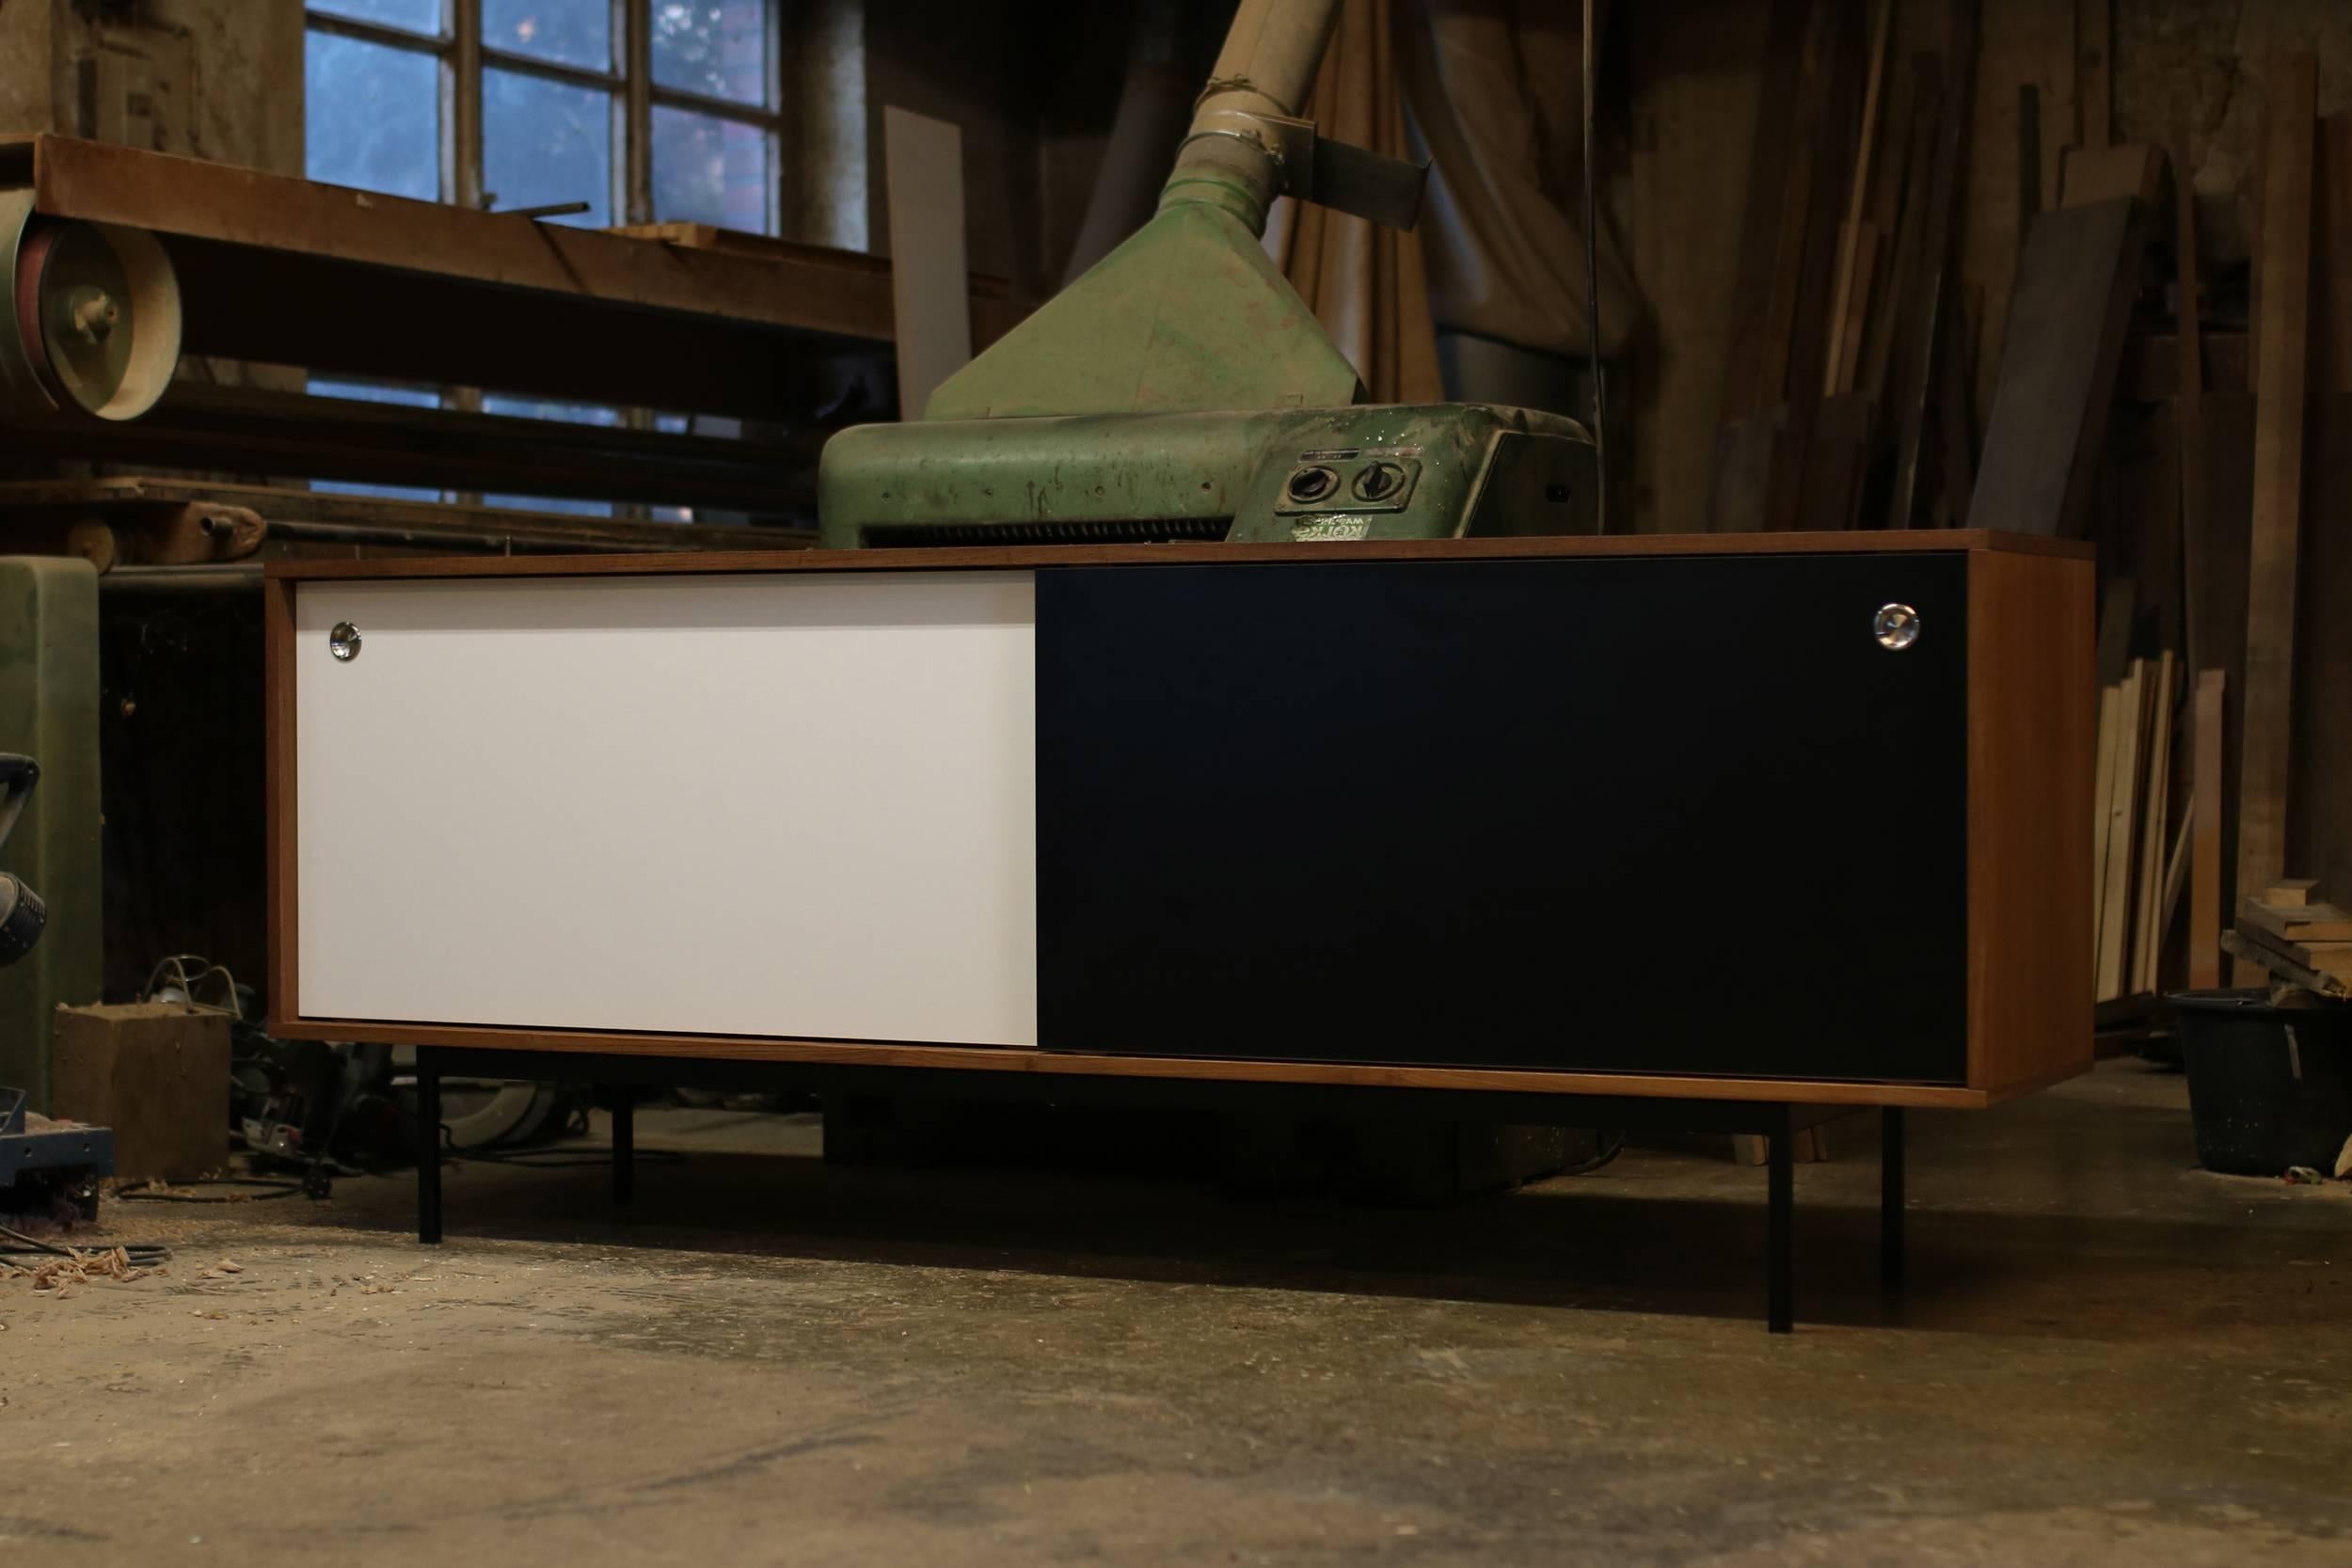 Beautiful teak sideboard, freestanding, made in Germany, design by Nathan Lindberg (Nathan Lindberg Design)
Black and White HPL (Formica) sliding doors with stainless steel door handles, iron base powder coated in black.
Best condition, the